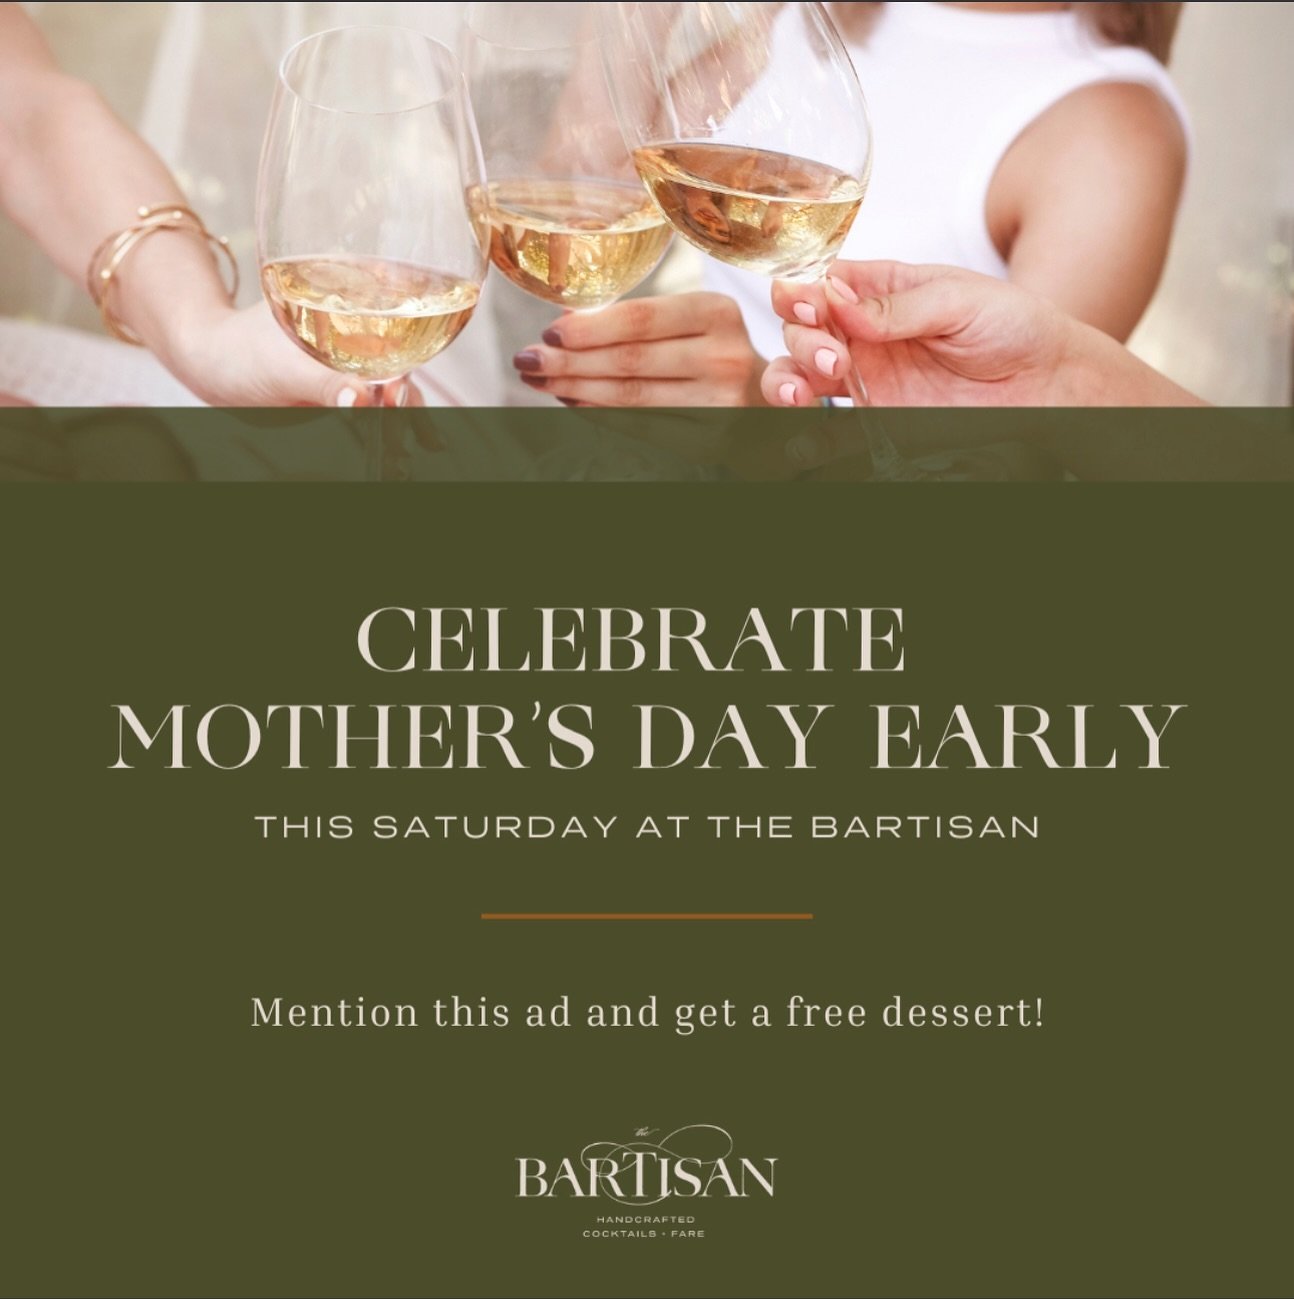 Celebrate Mother&rsquo;s Day THIS SATURDAY 💐🥂

Join us this Saturday, May 11th to celebrate mom and day early. ✨Mention this ad and get a free dessert ✨

Don&rsquo;t forget:

HAPPY HOUR 3-6PM
RESERVATIONS AVAILABLE 734-359-3694